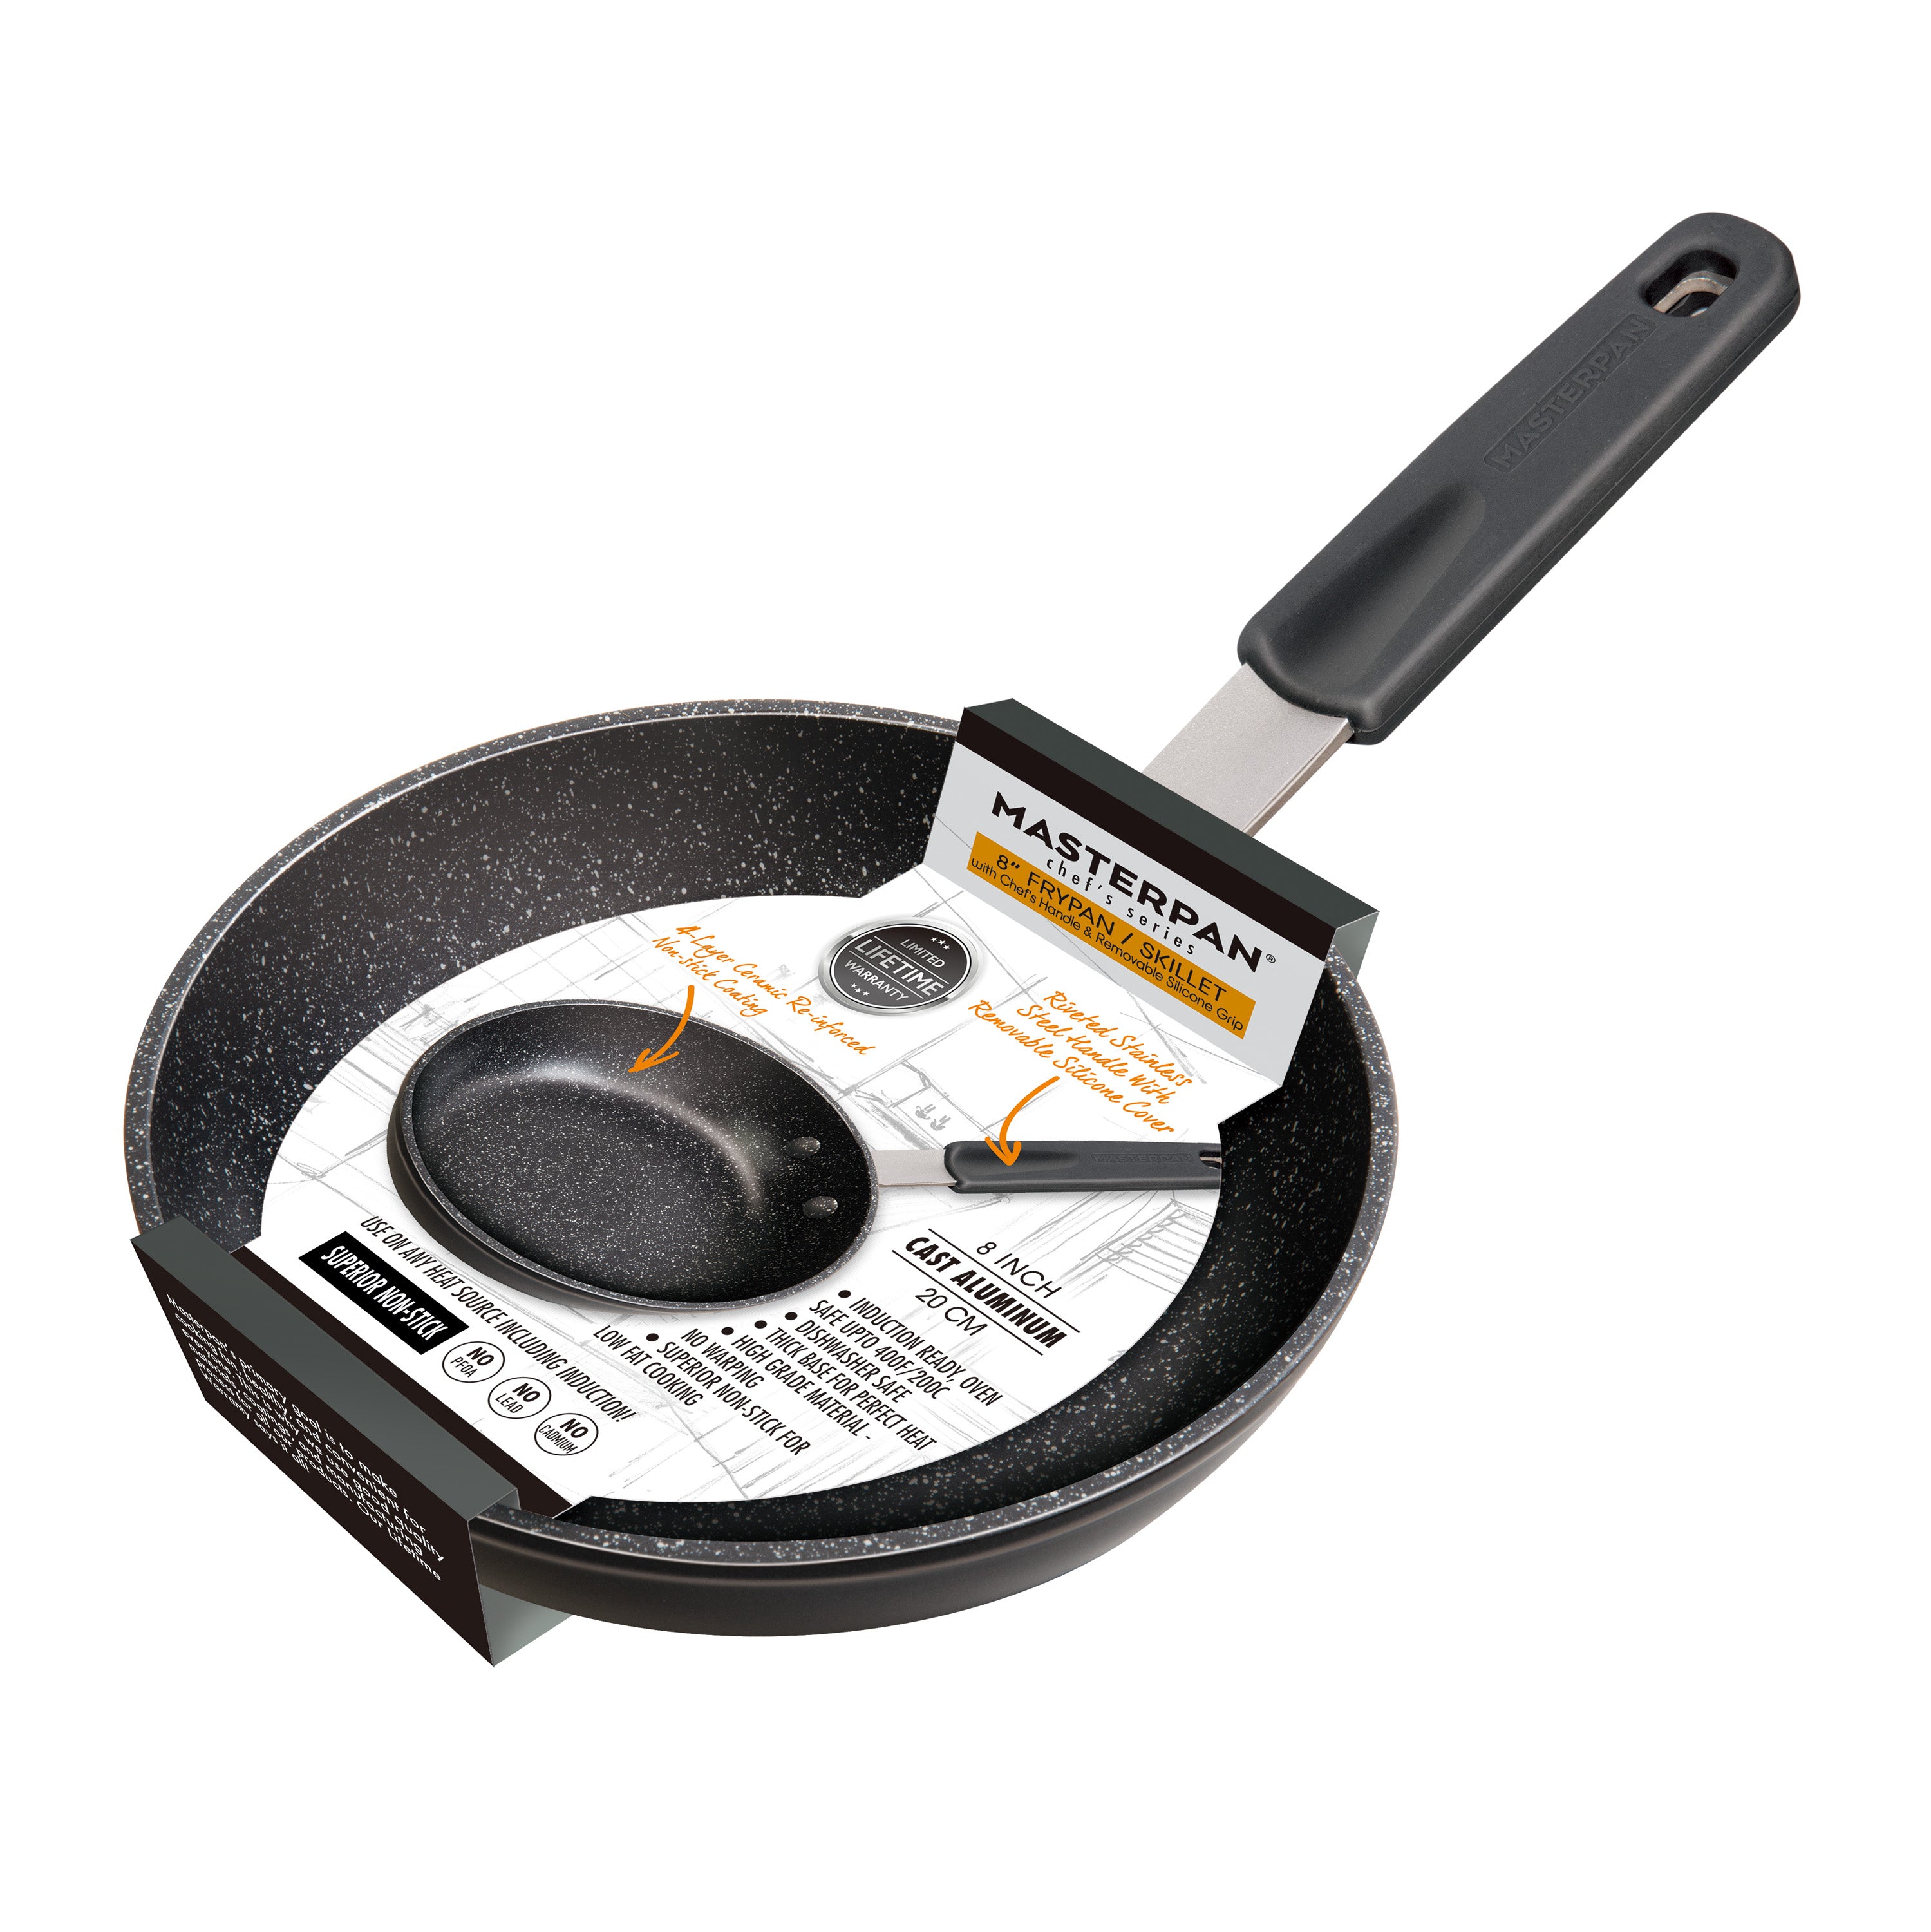 MASTERPAN Nonstick Frypan & Skillet with Chefs Handle, 8